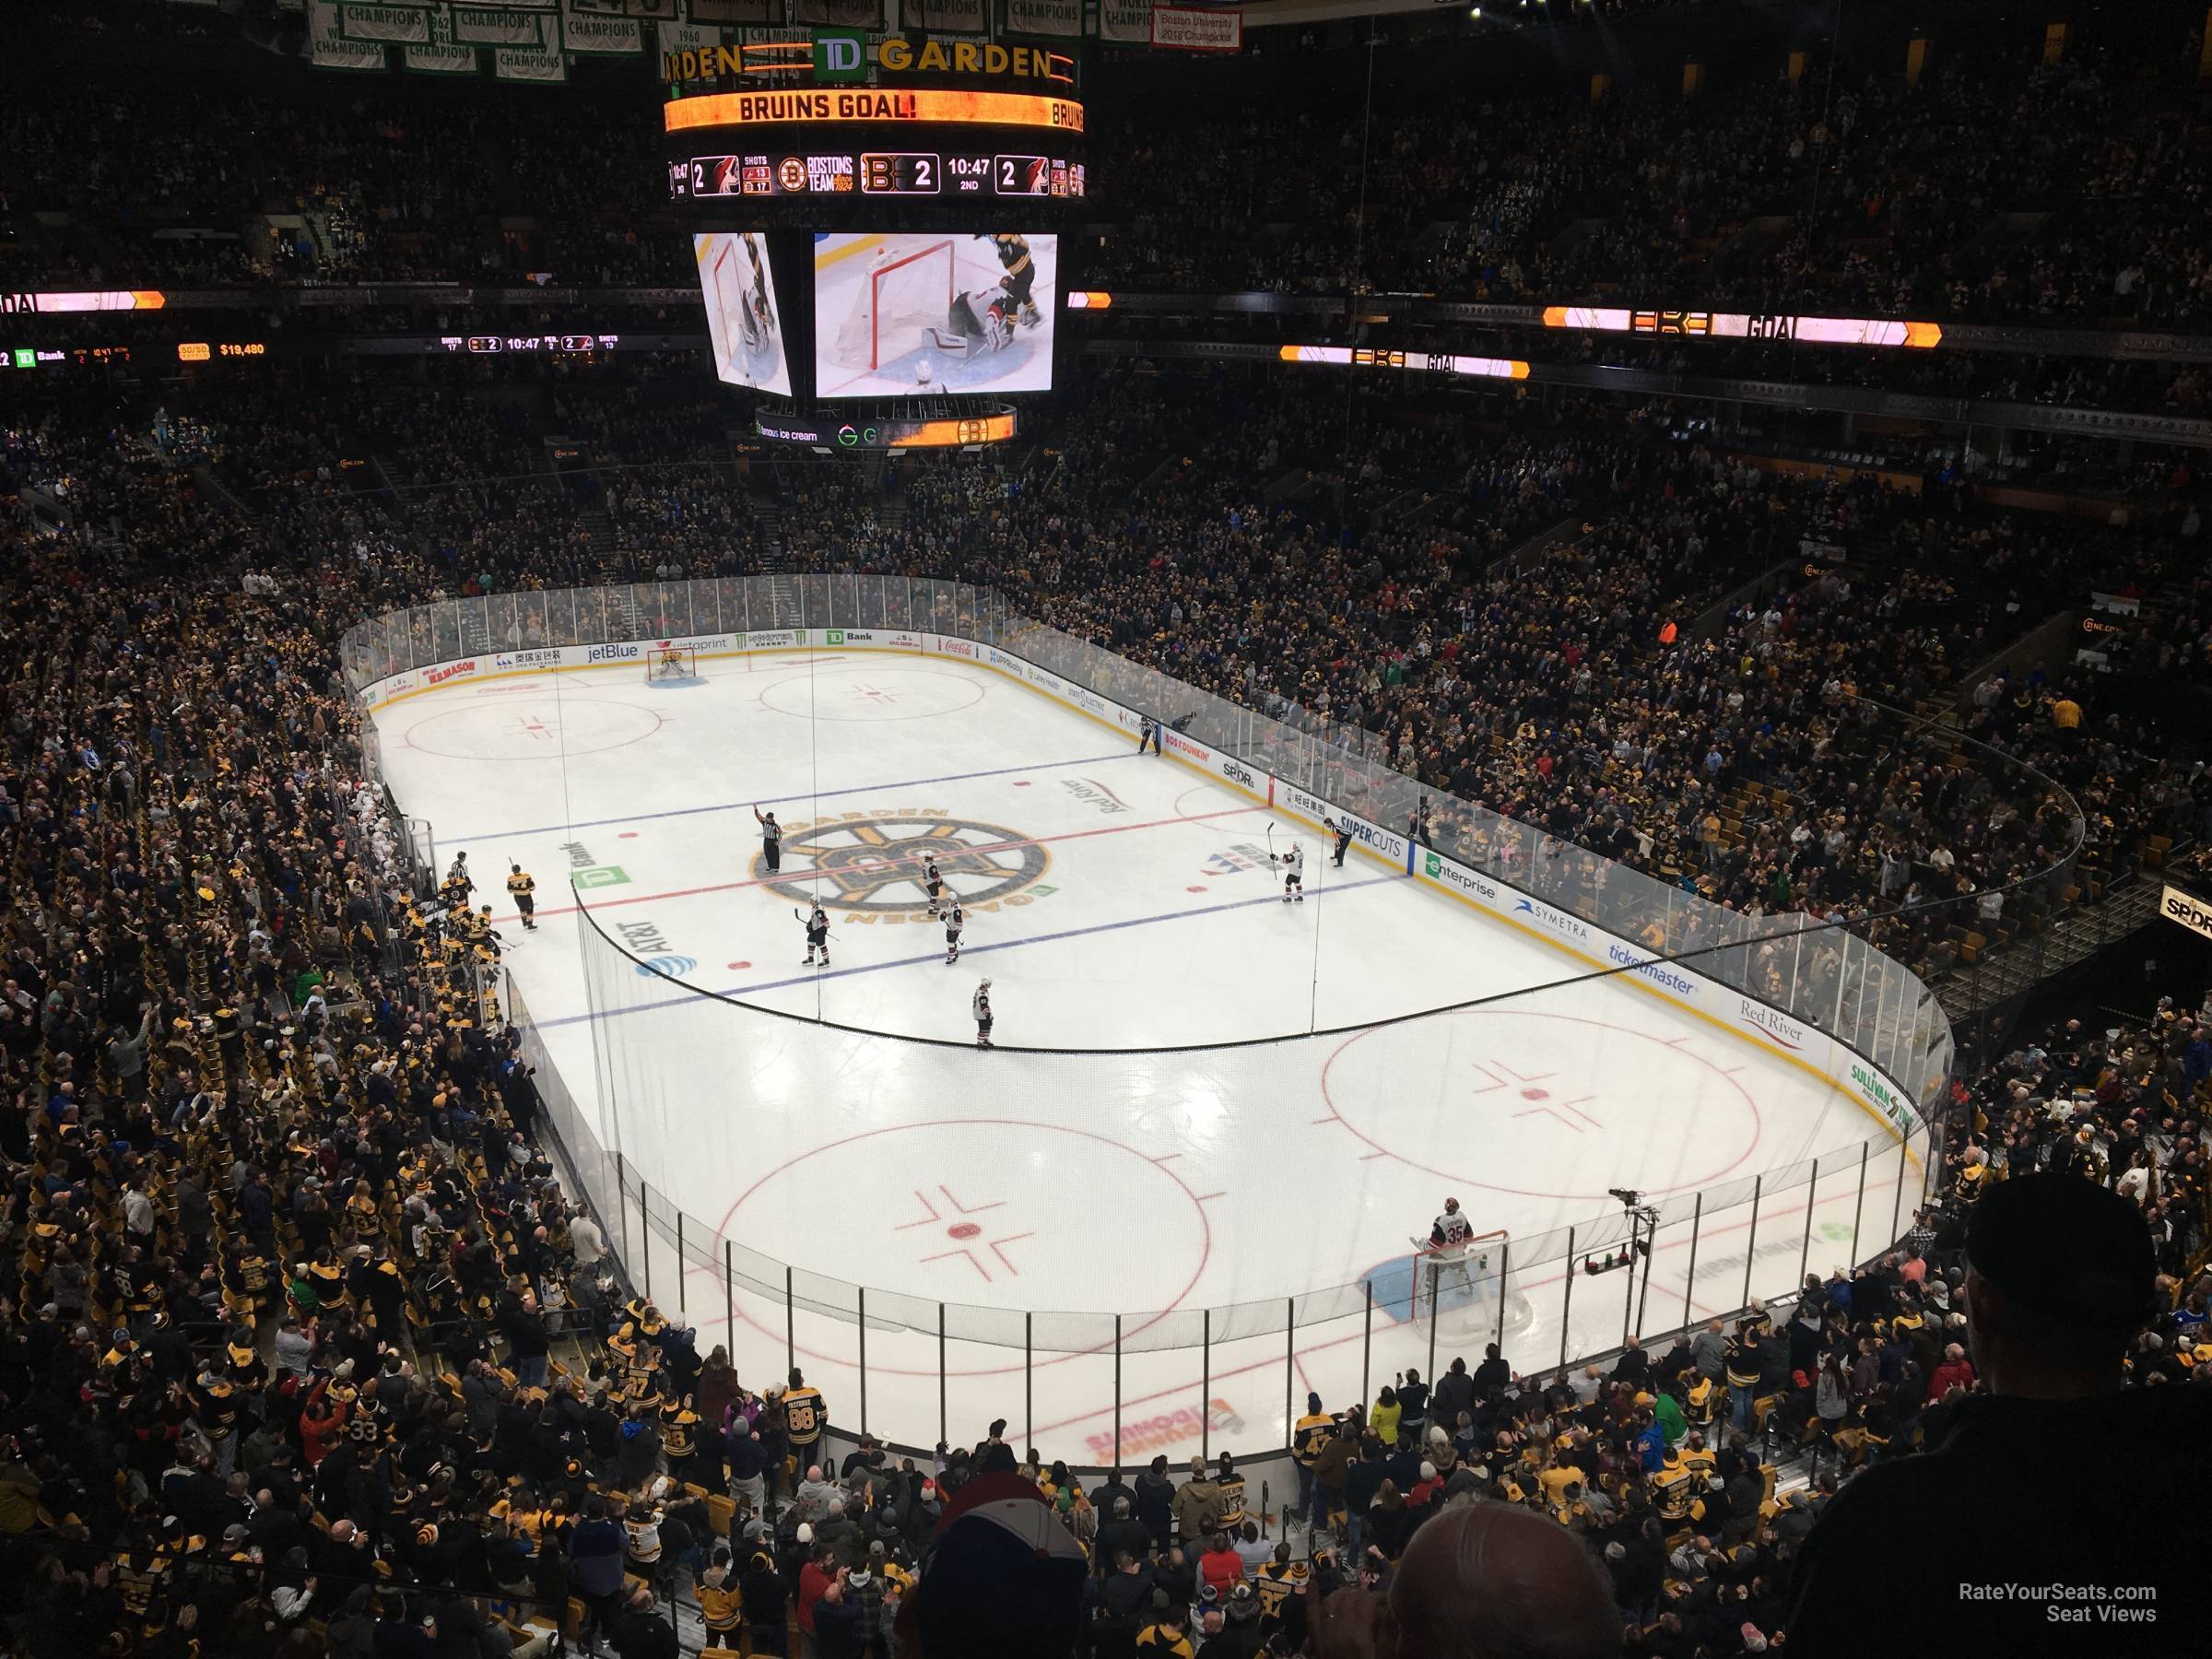 section 325, row 3 seat view  for hockey - td garden